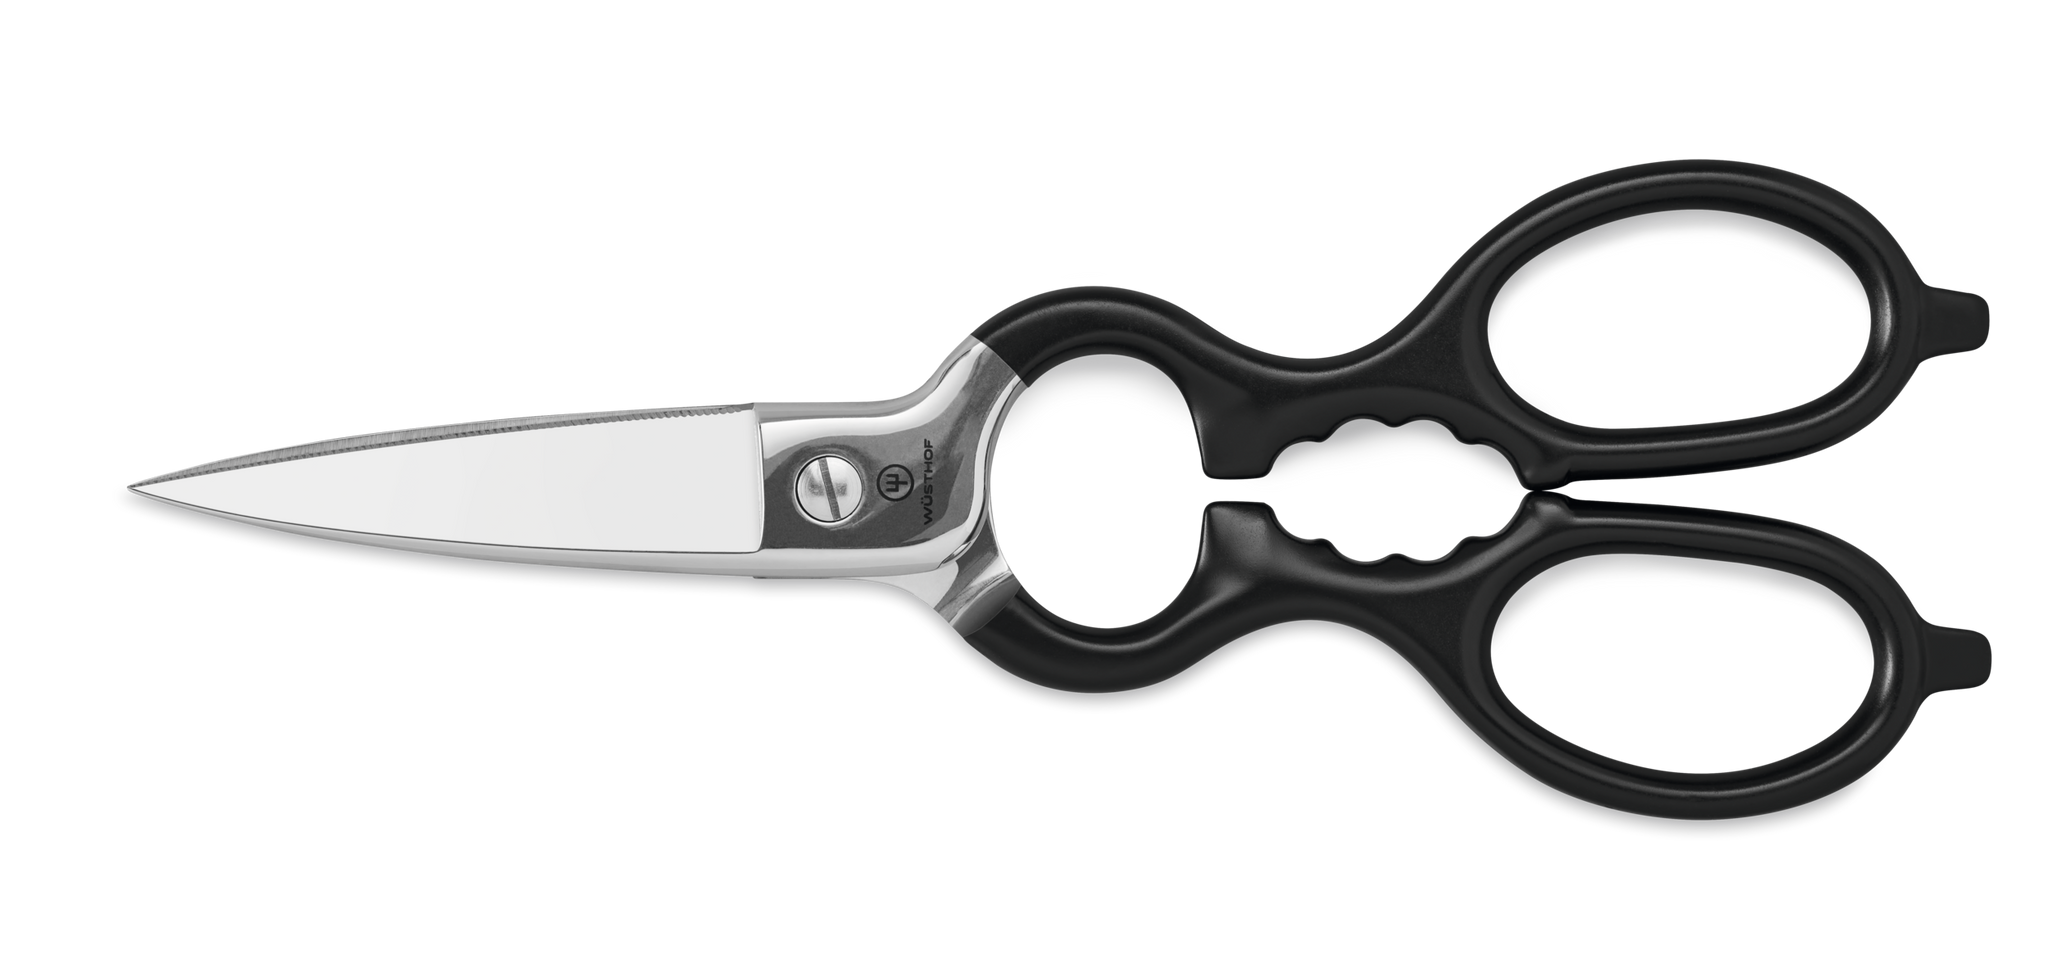 Stainless Kitchen Shears with Synthetic Grips